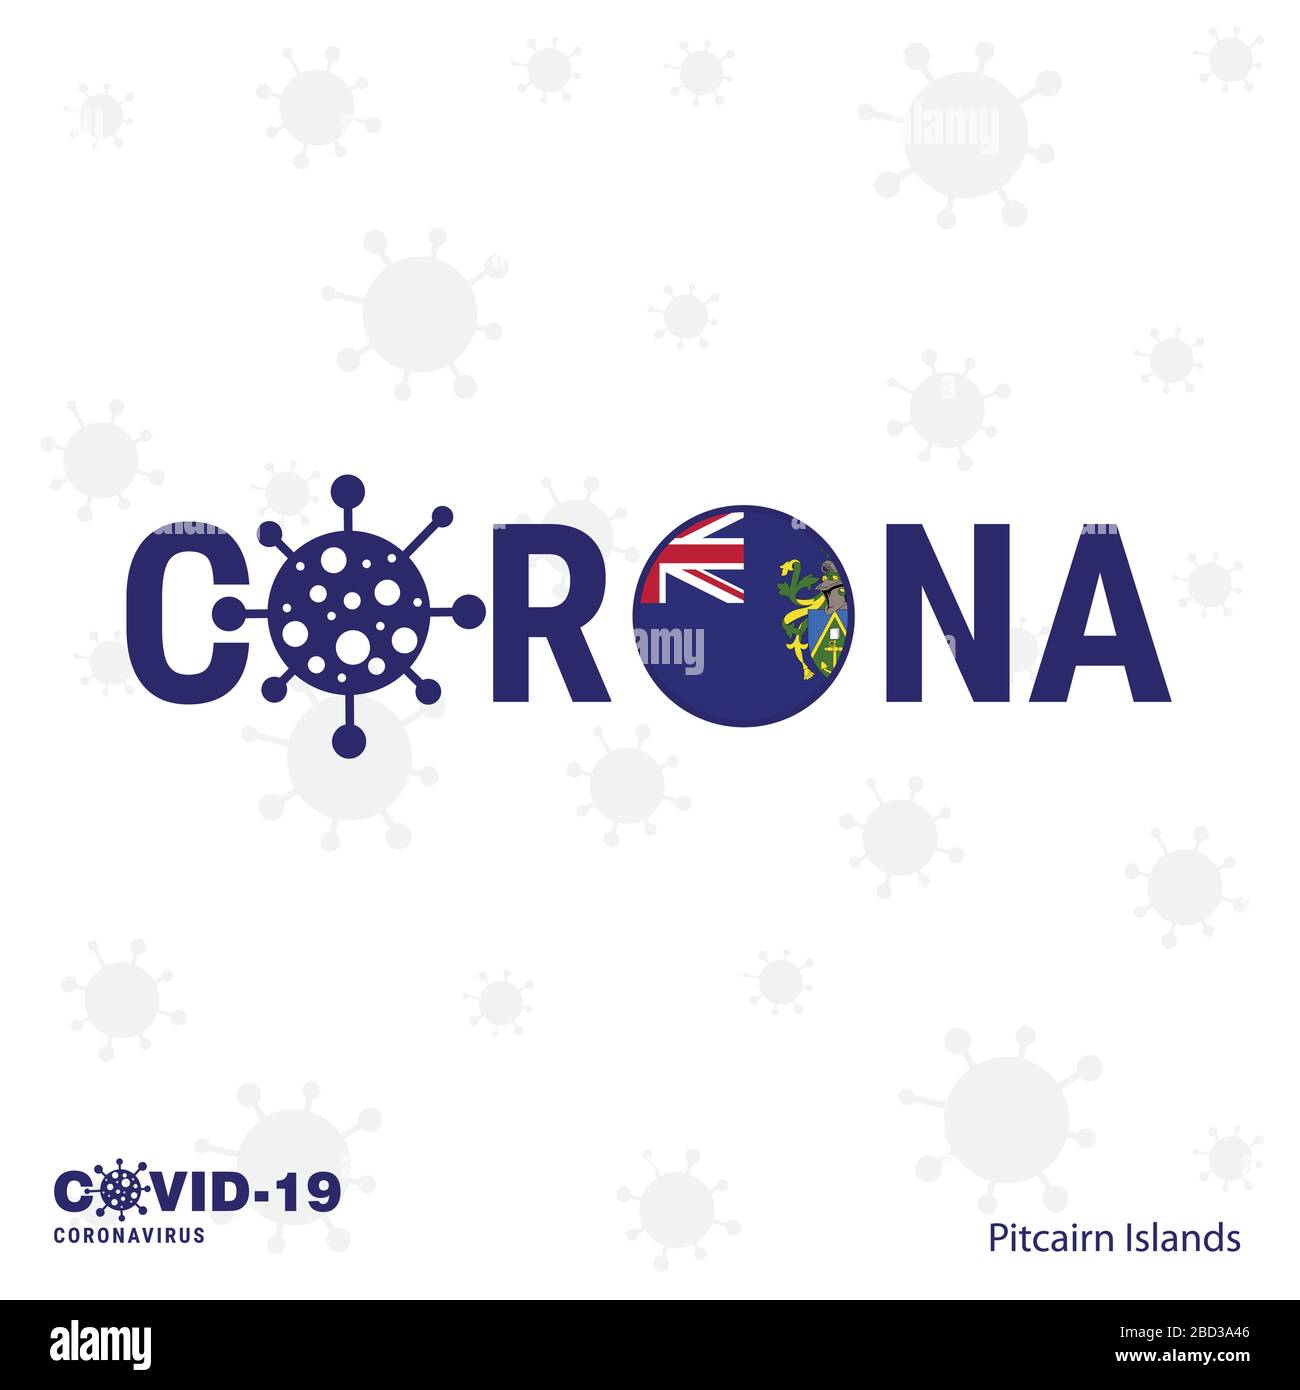 Pitcairn Islnand Coronavirus Typography. COVID-19 country banner. Stay home, Stay Healthy. Take care of your own health Stock Vector